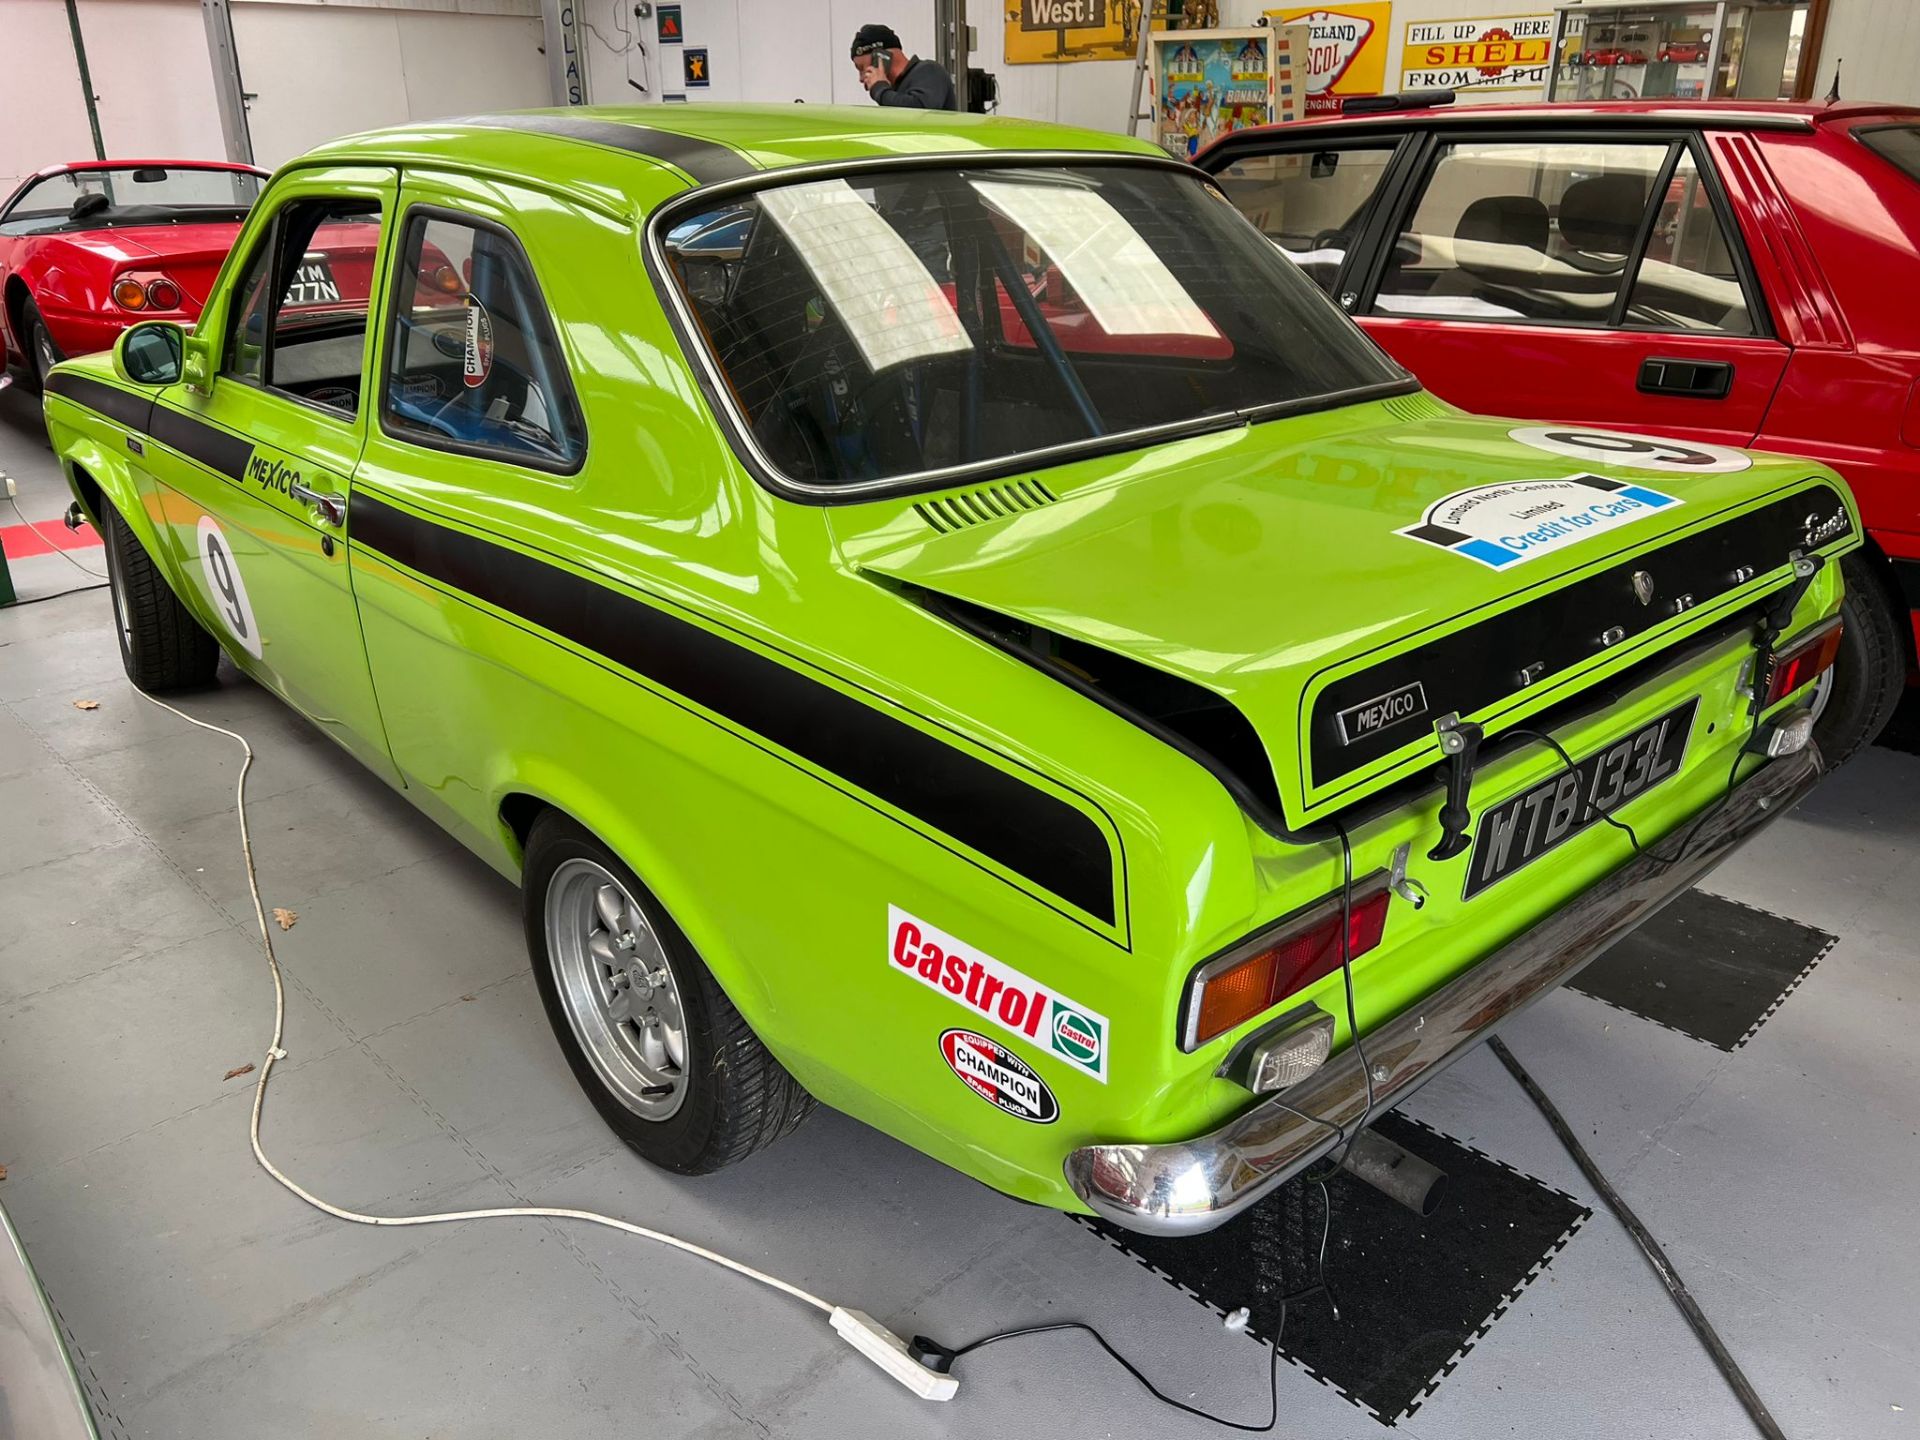 Ford Escort Mk1 X-Sport Mexico Competition Car 1973 - Image 12 of 16